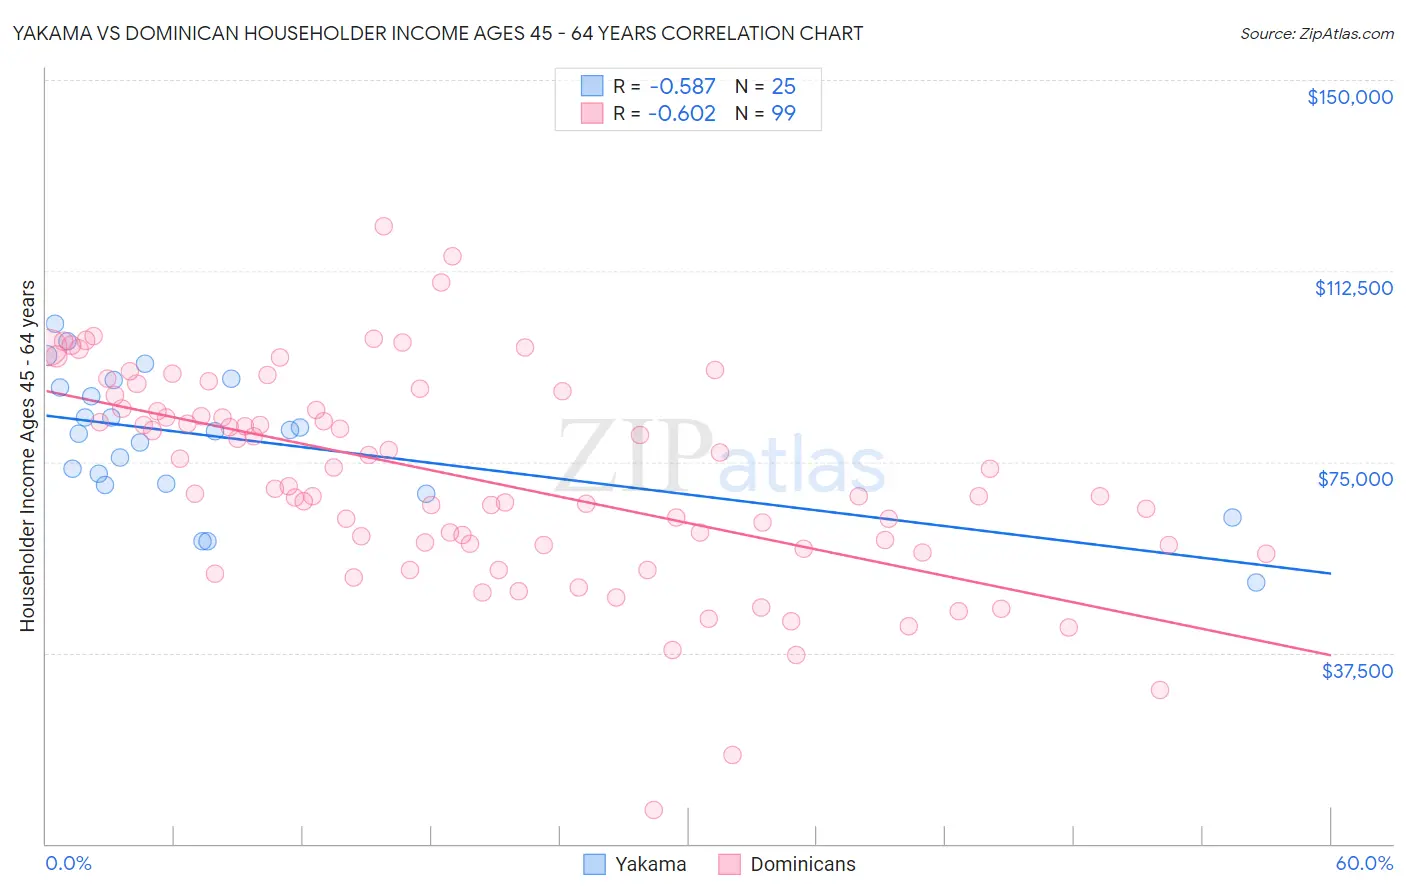 Yakama vs Dominican Householder Income Ages 45 - 64 years